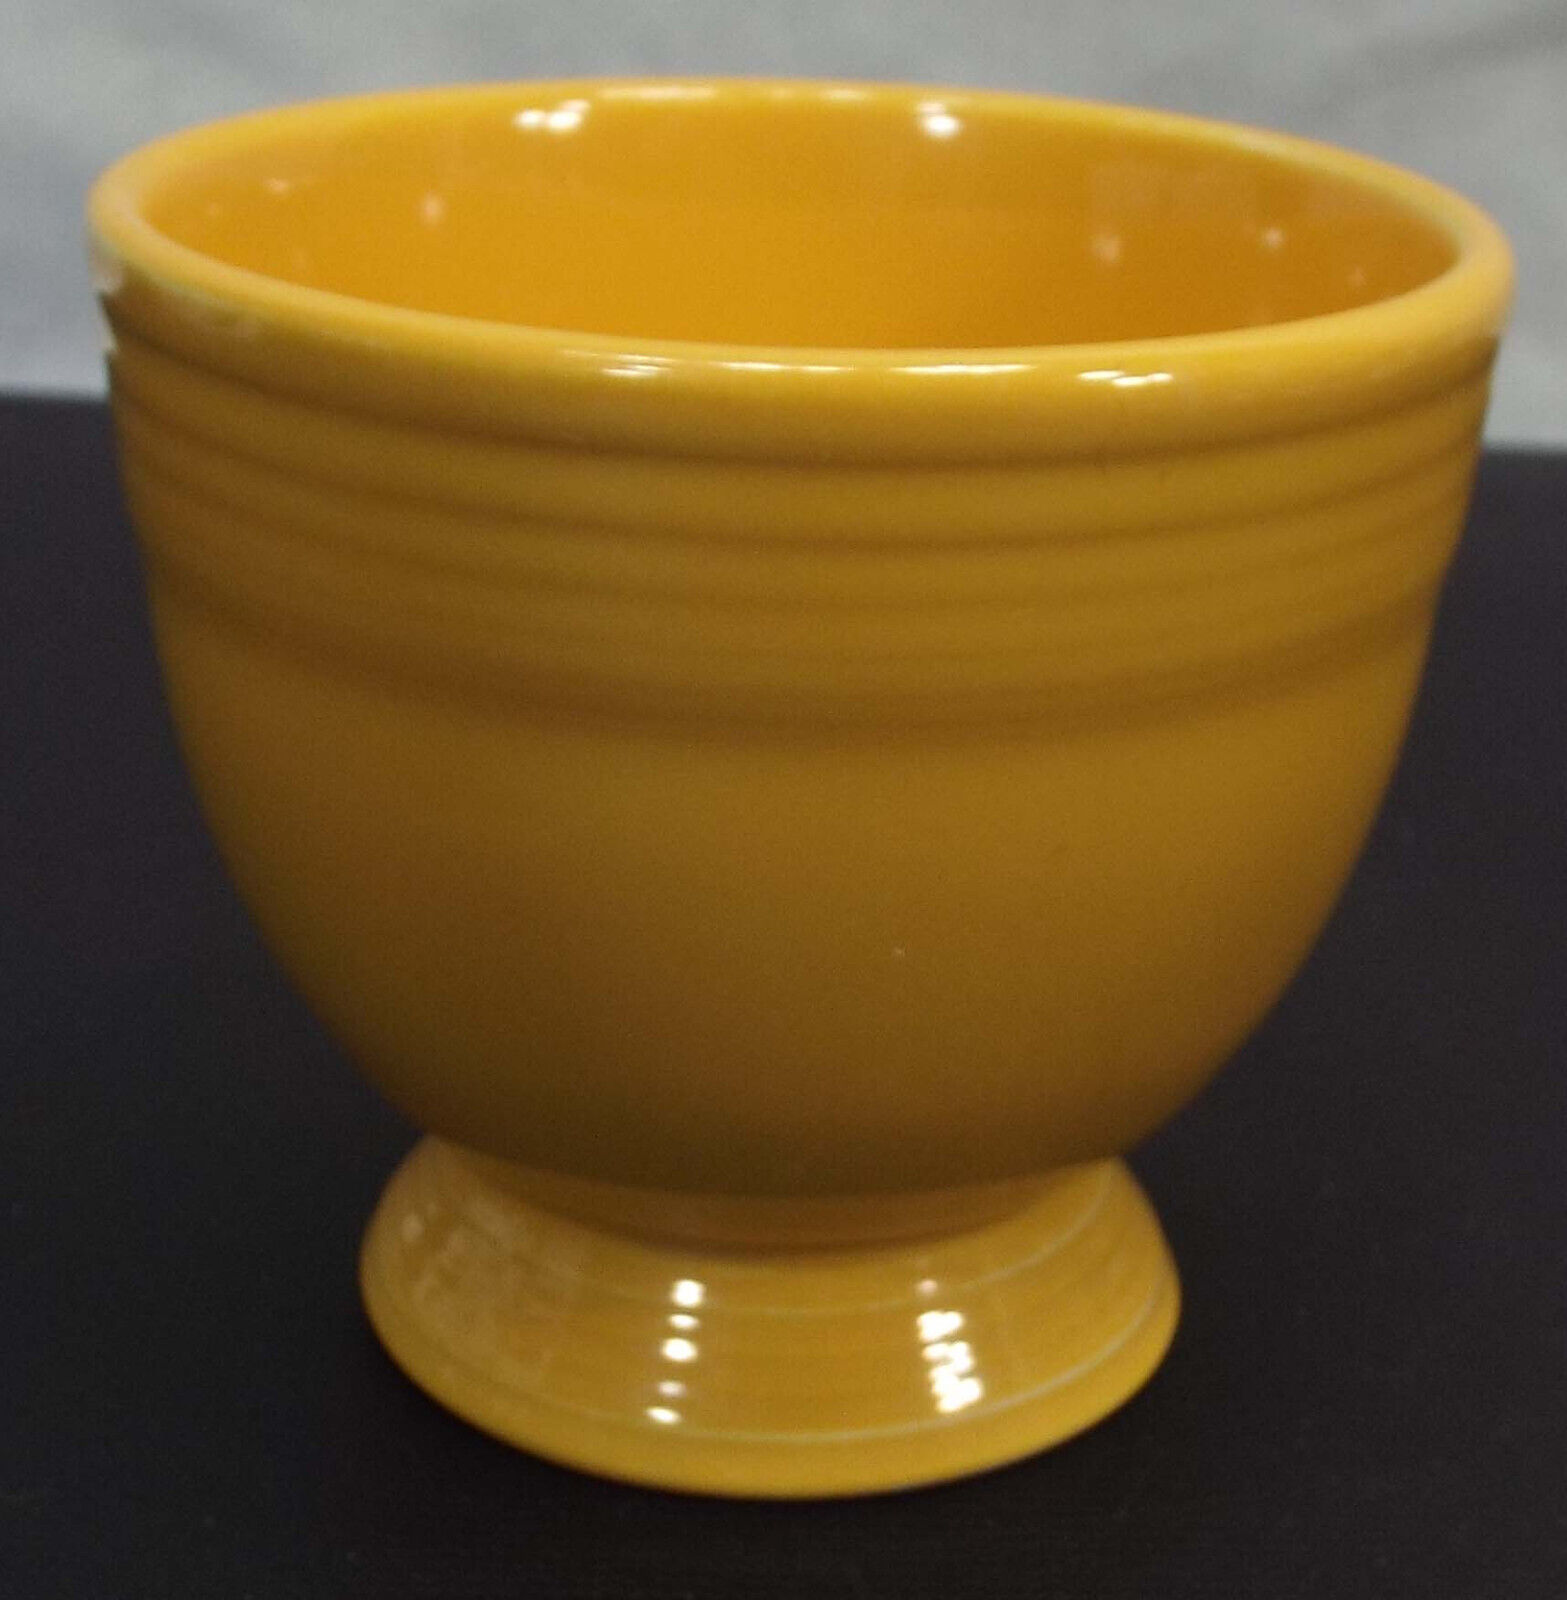 Mint Condition Vintage Yellow  Fiesta Egg Cup - Fiestaware